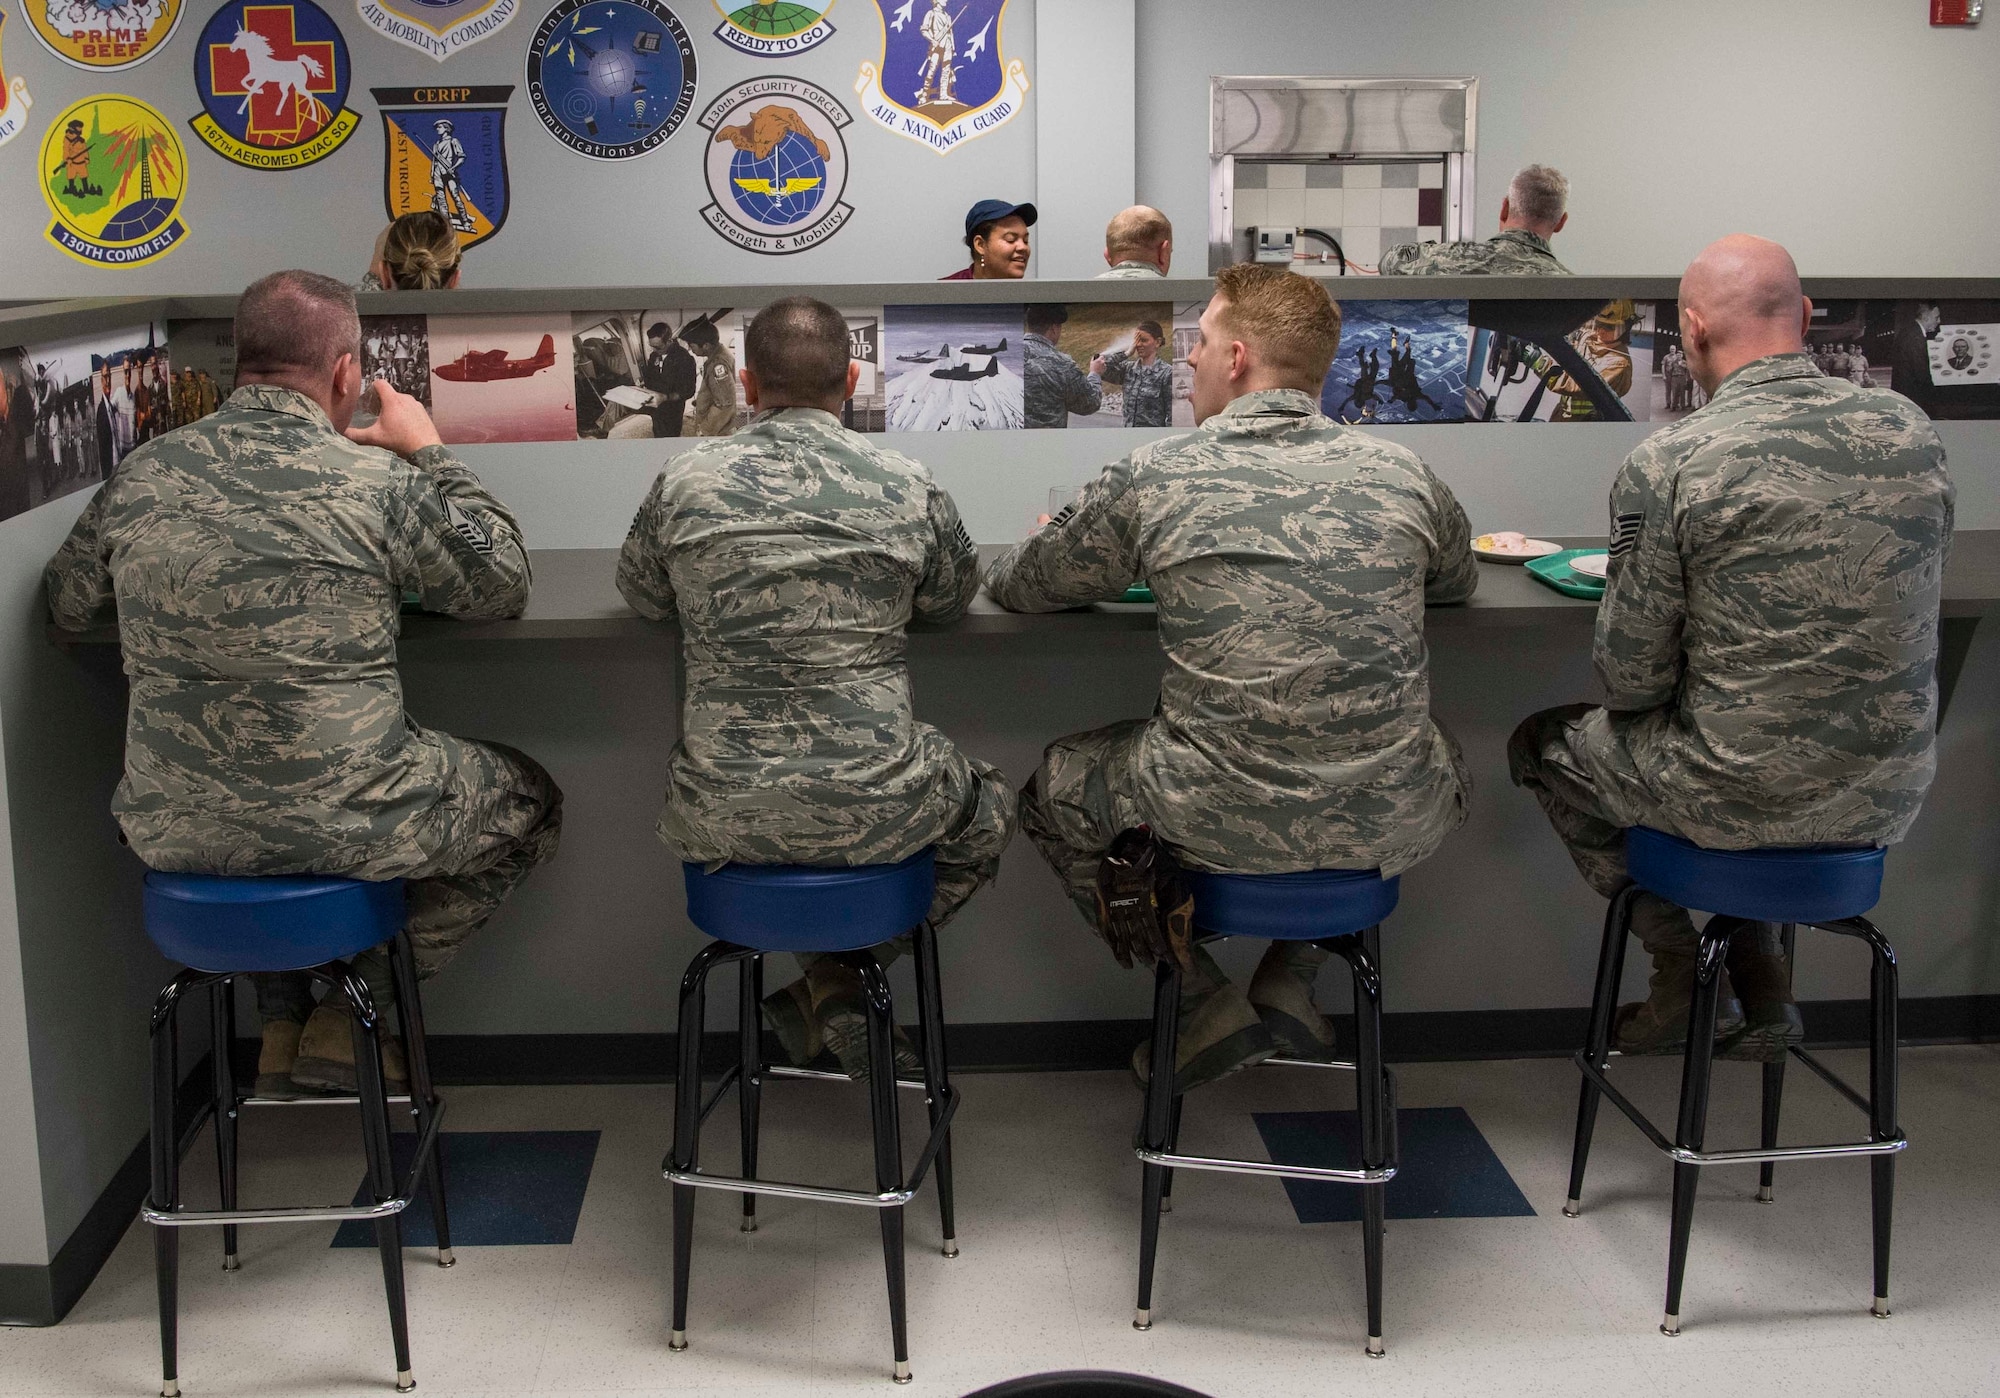 Airmen from the 130 AW enjoy lunch at the newly dedicated Props & Wings dining facility on March 4, 2018.  Historical photos line the walls and portray the wings unique history. The newly designed dining facility features a historical timeline of our rich Air Force heritage.  (U.S. Air National Guard photo by Tech. Sgt. De-Juan Haley)